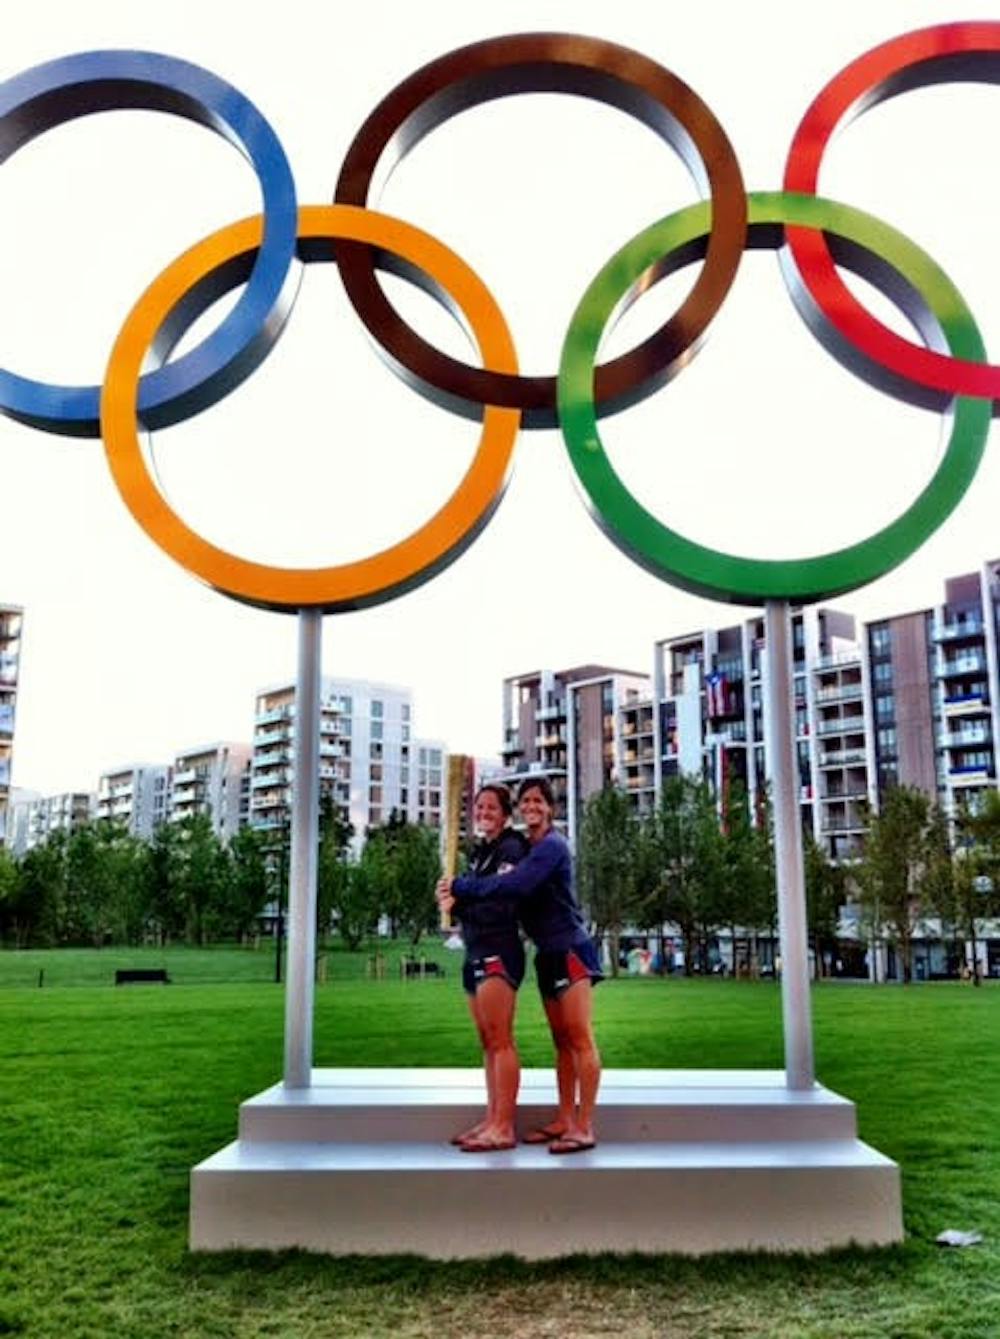 &nbsp;Julia Reinprecht ’14 and Katie Reinprecht ’13 with Olympic Torch and Rings at the Athlete Village.